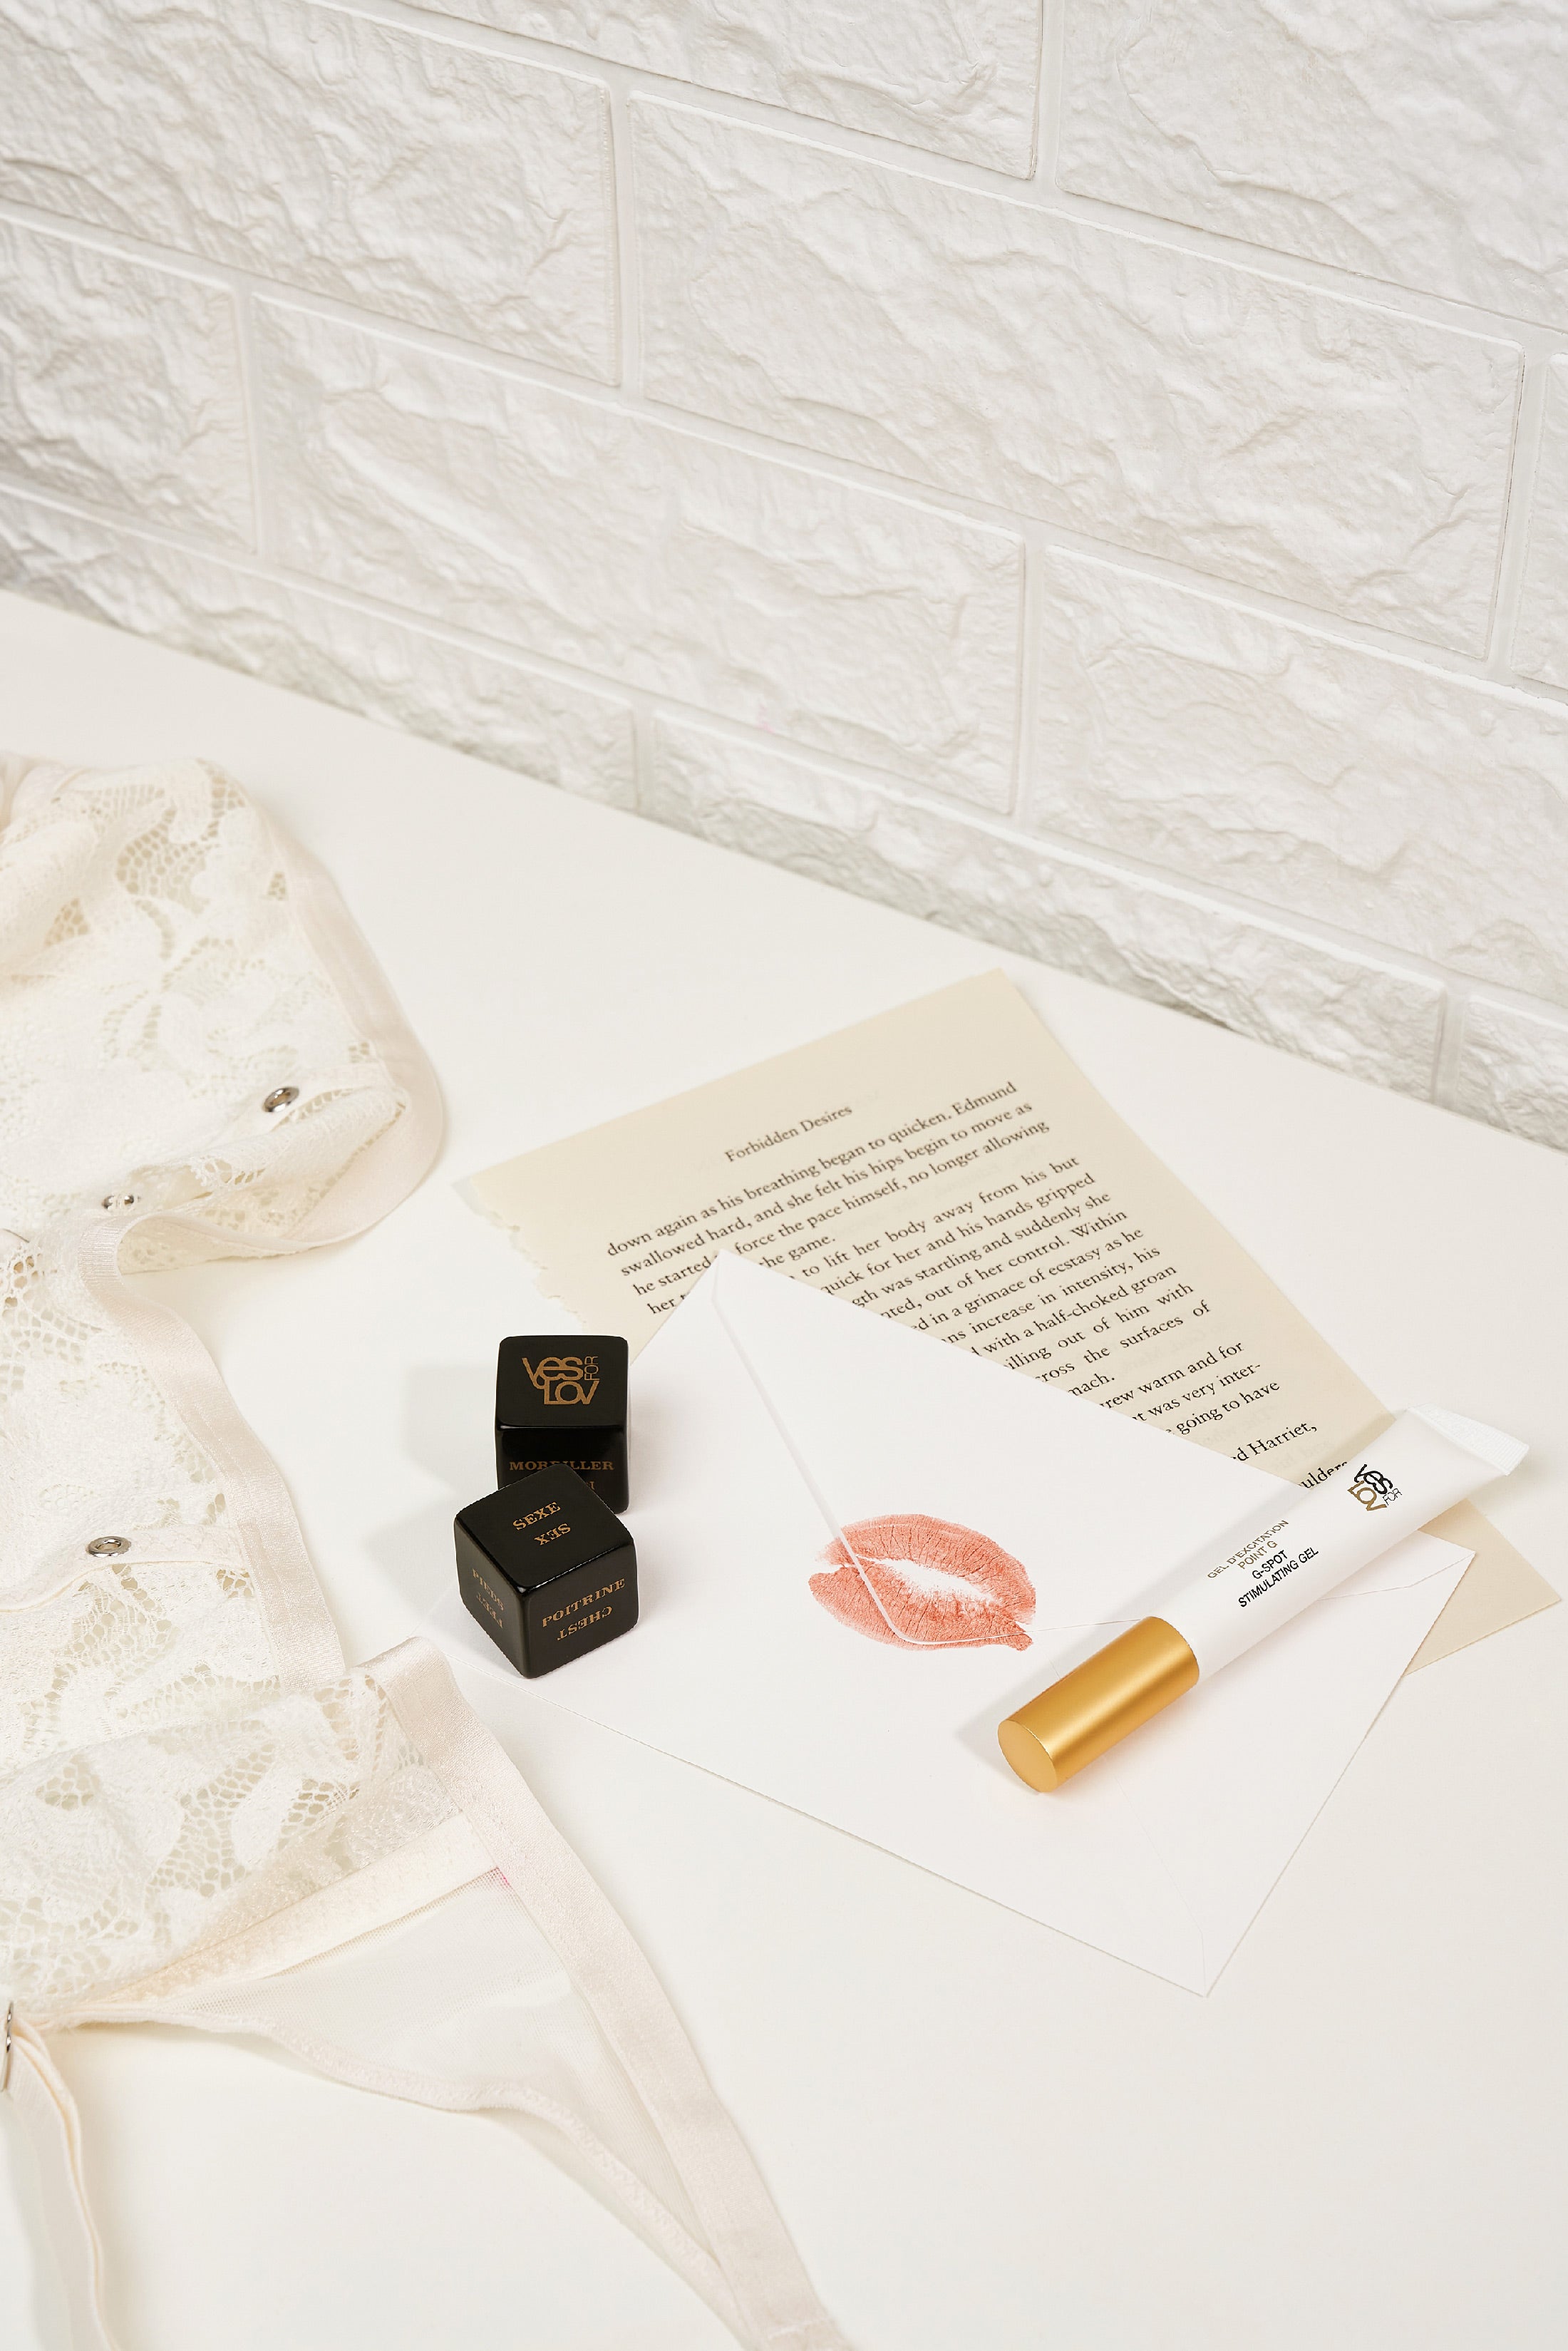 The YESforLOV intimate hide-and-seek kit to write your most beautiful statements on the body in invisible ink